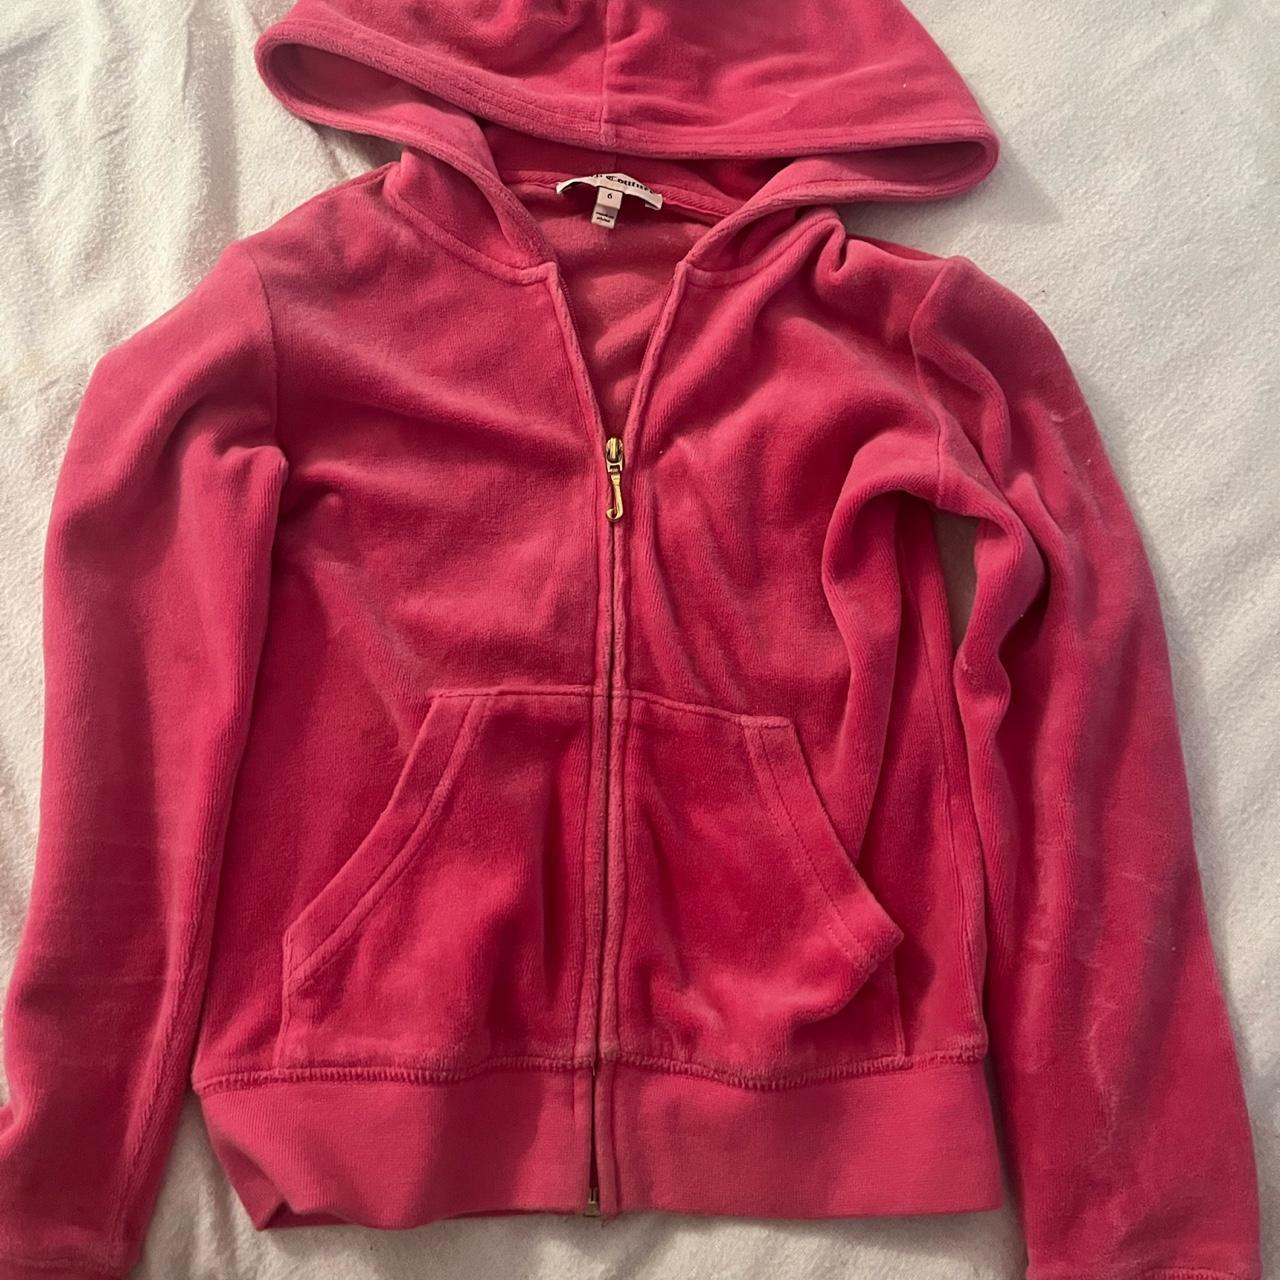 Juicy Couture Women's Pink and Gold Jacket | Depop